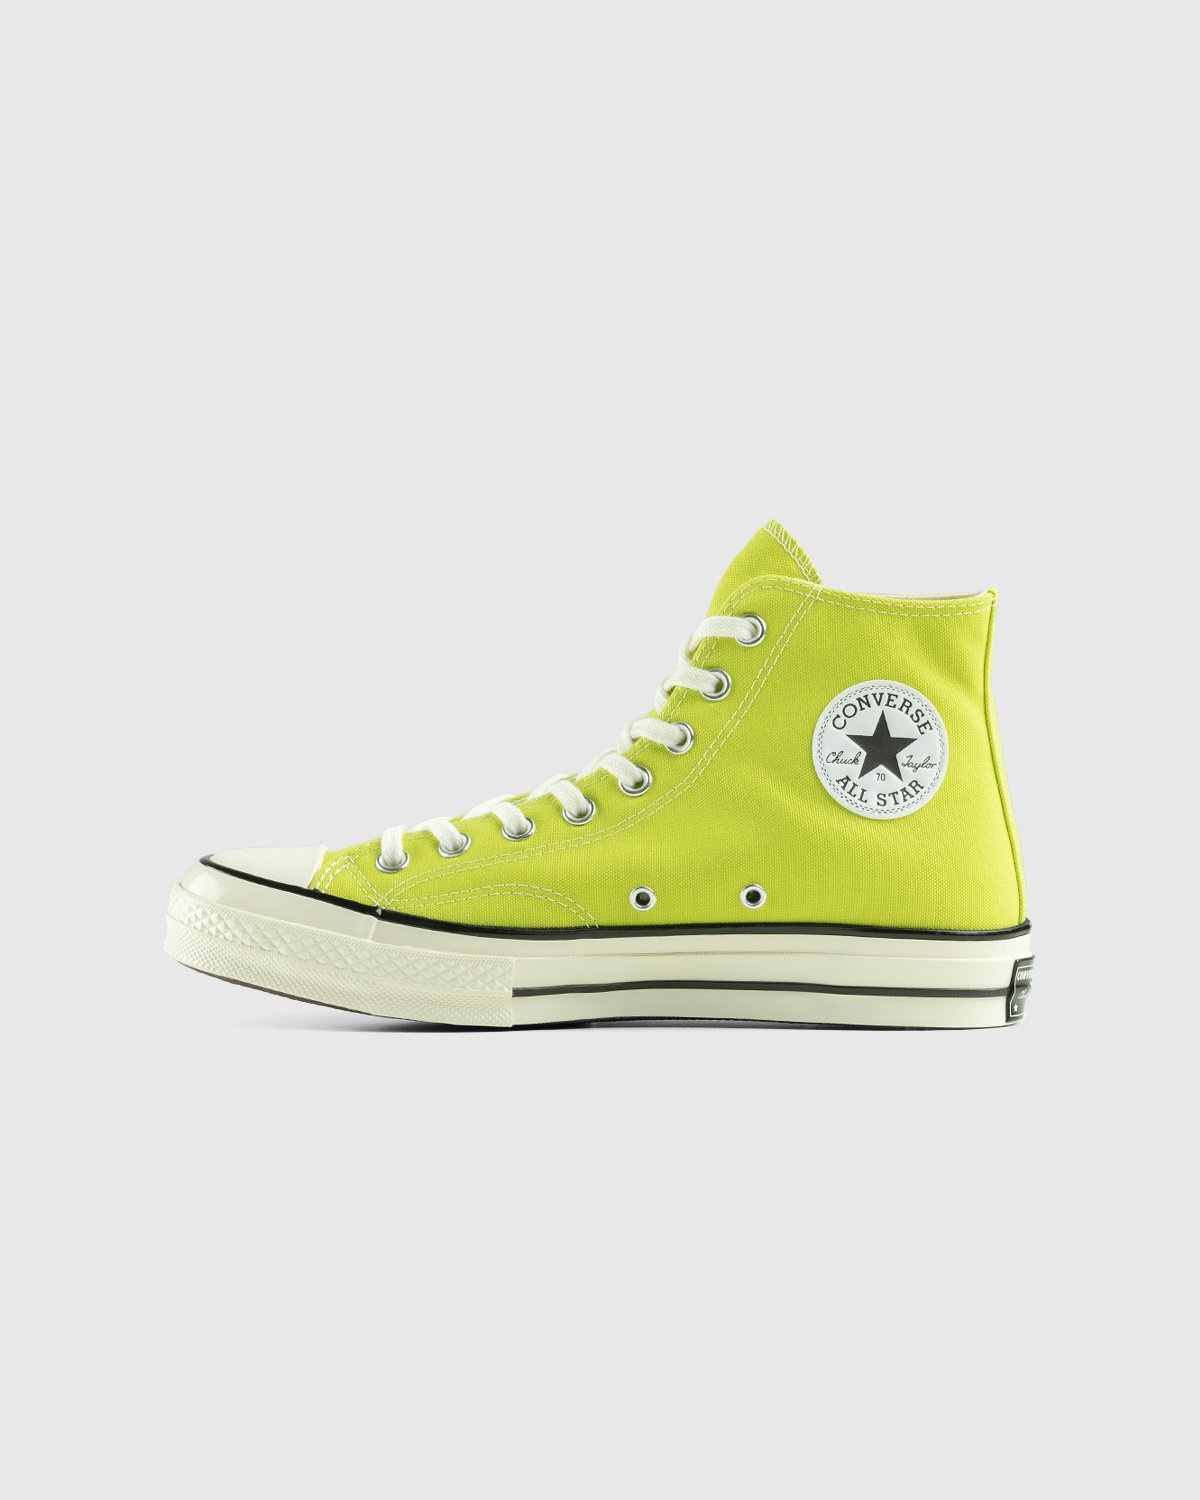 Converse – Chuck 70 Lime Twist Egret Black - High Top Sneakers - Yellow - Image 2